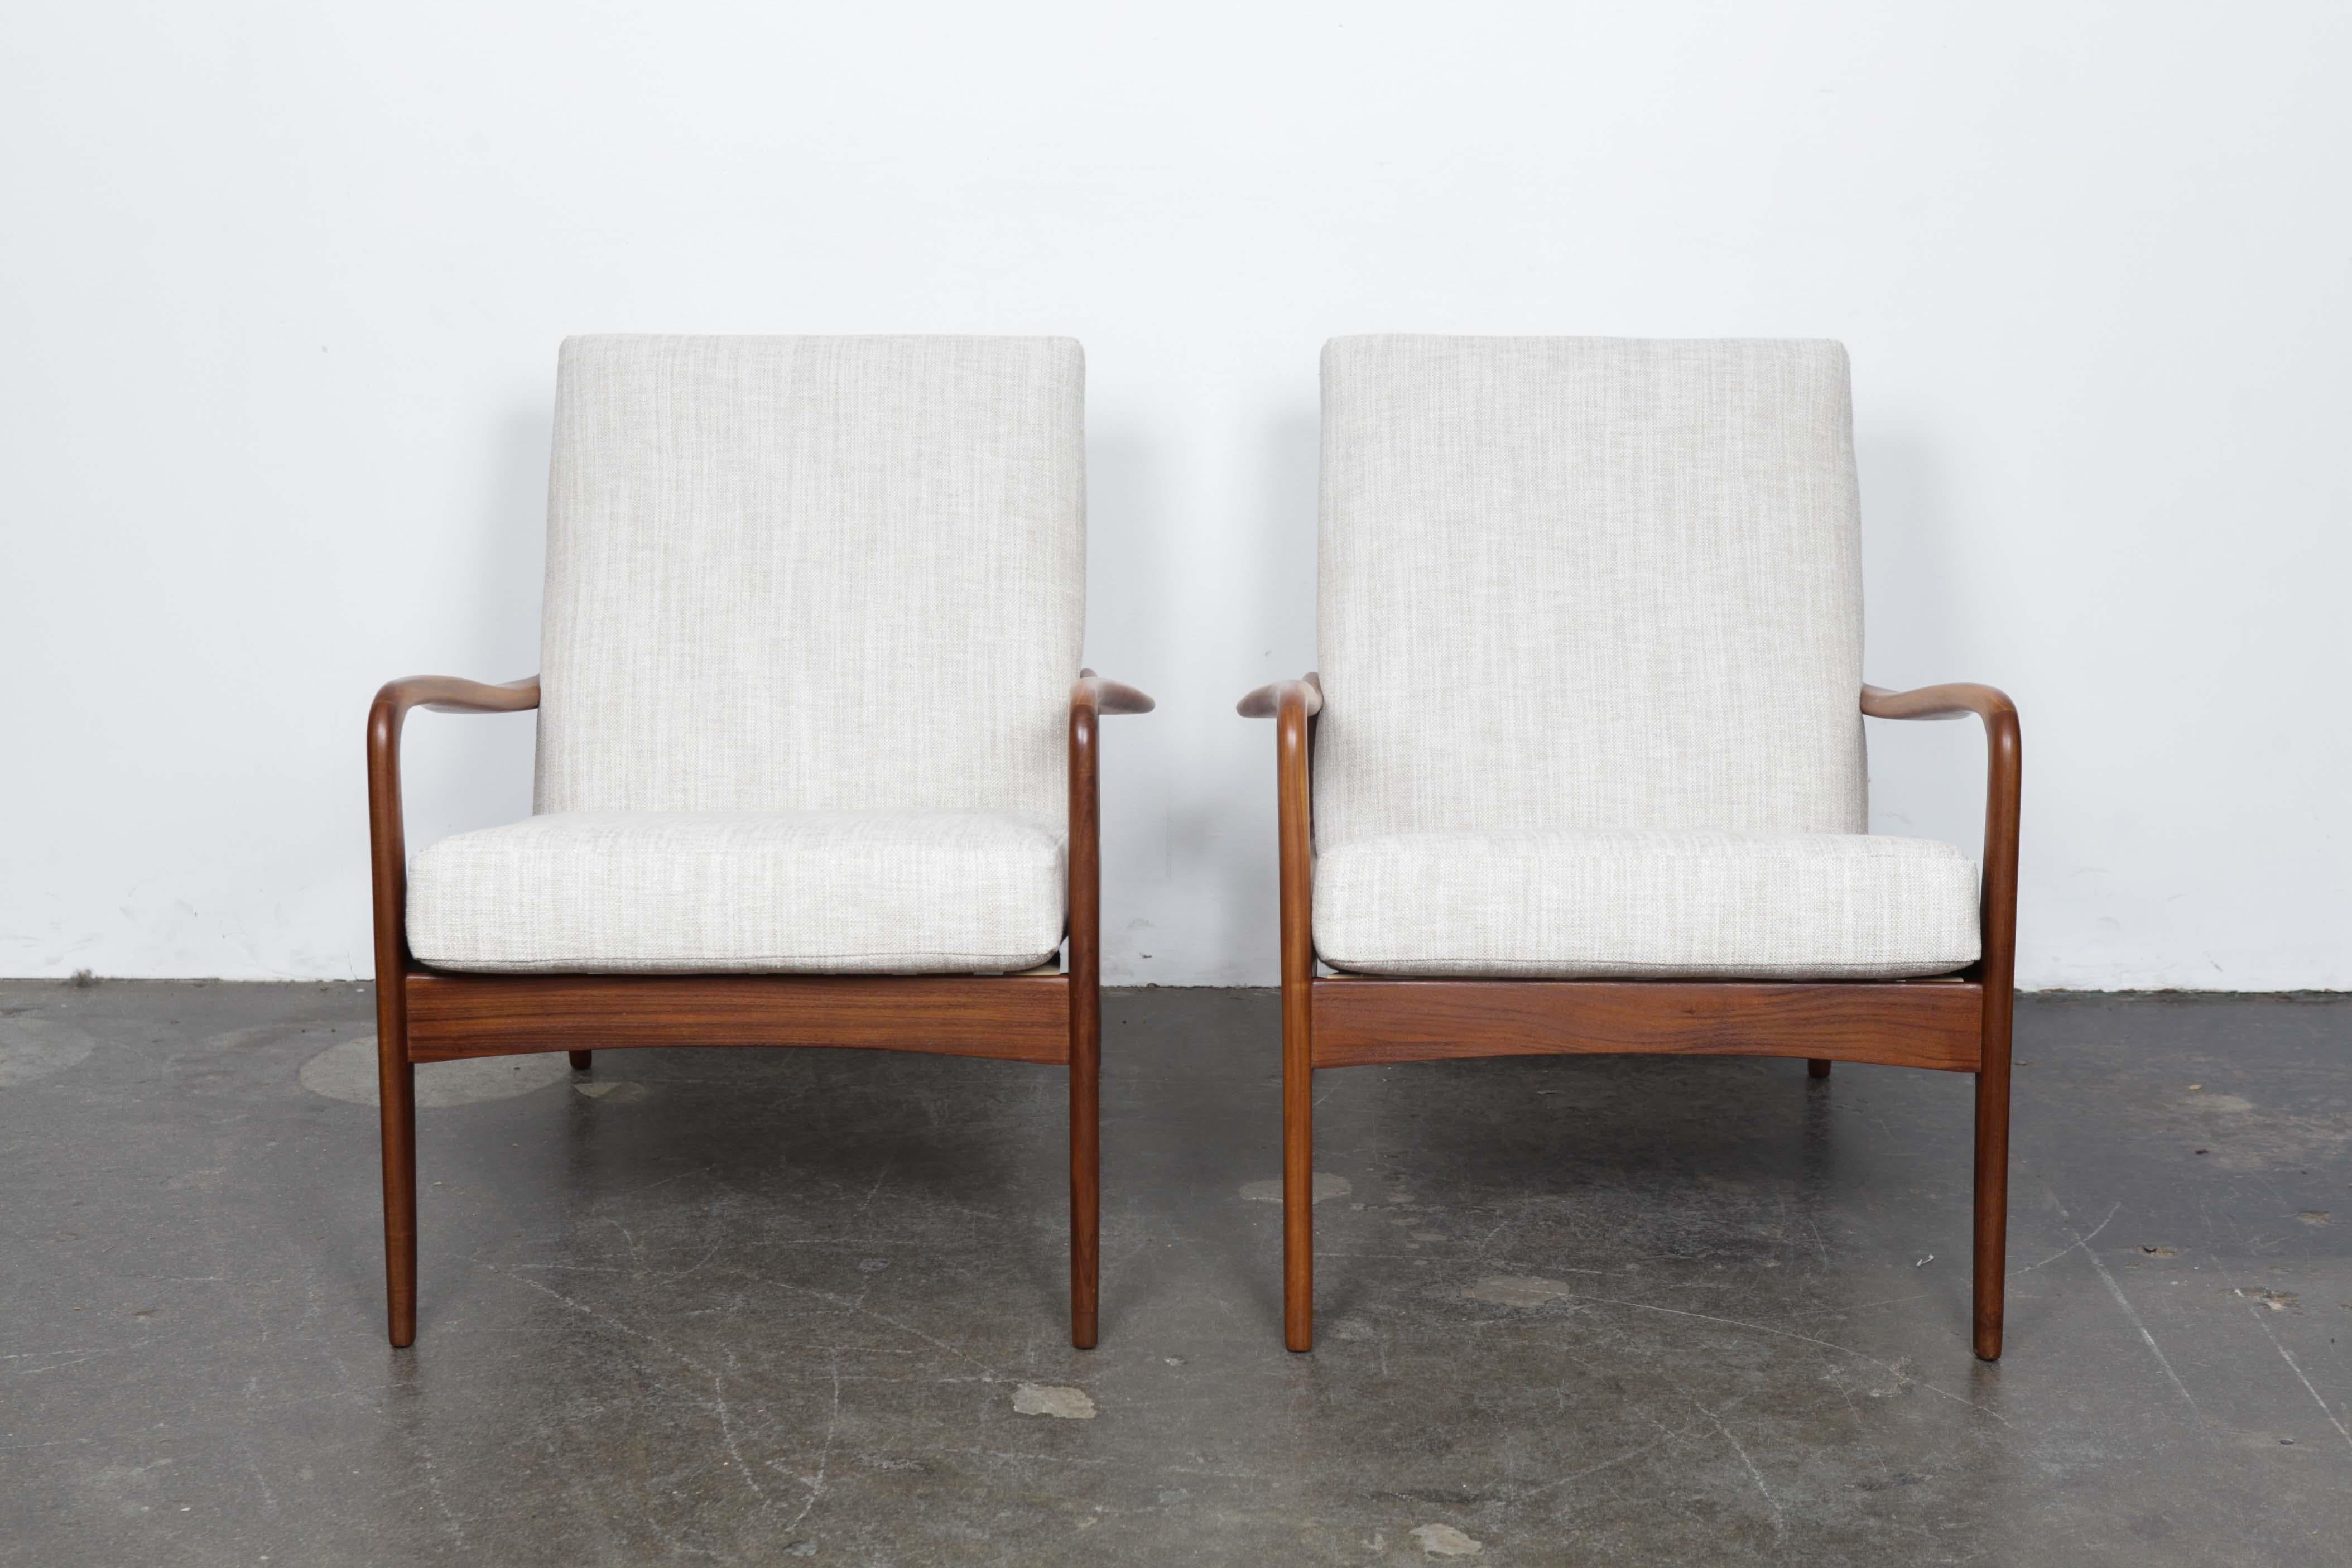 Matching pair of British midcentury lounge chairs by Greaves and Thomas, circa 1960s. Lovely swooping arm design on these pieces. Newly refinished solid afromosia teak wood frames with newly upholstered back and seat done in an off-white Belgian